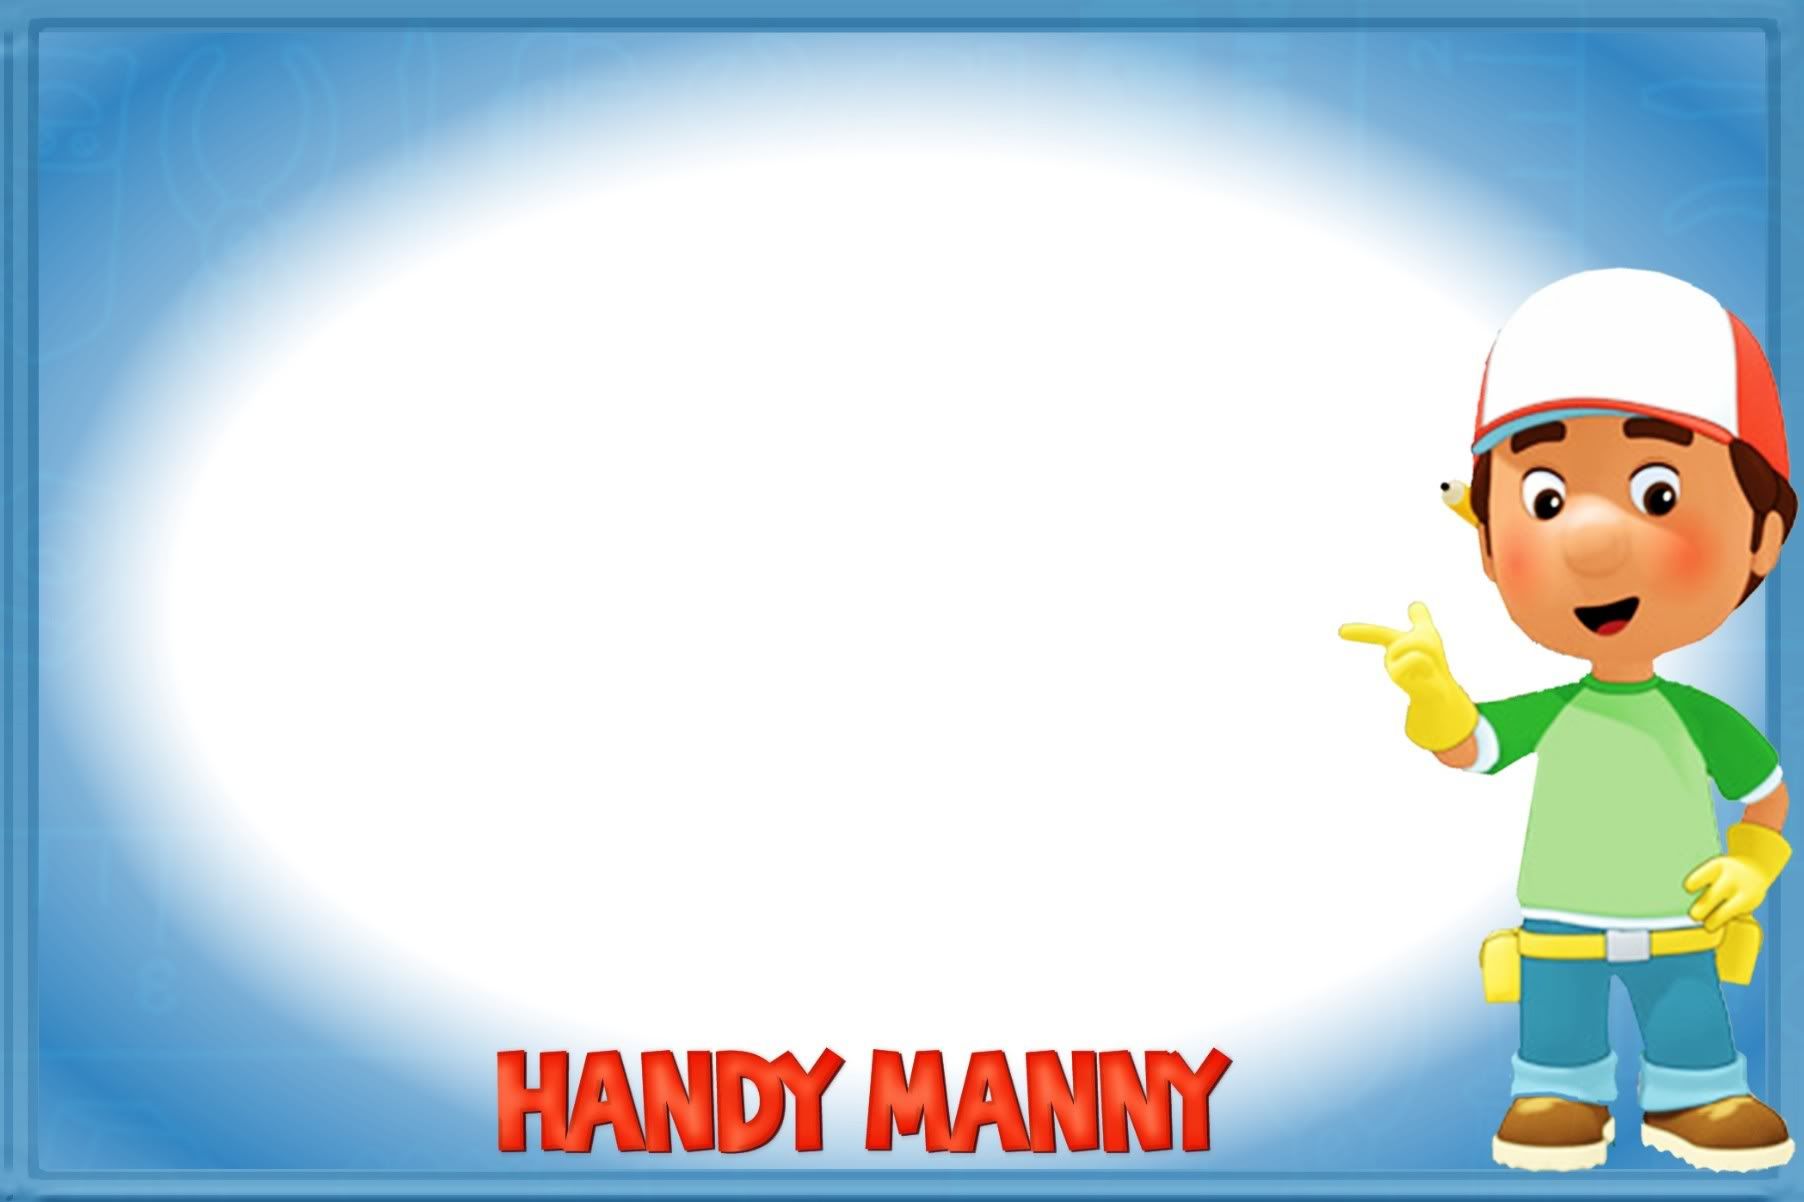 A possible fourth season of Handy Manny